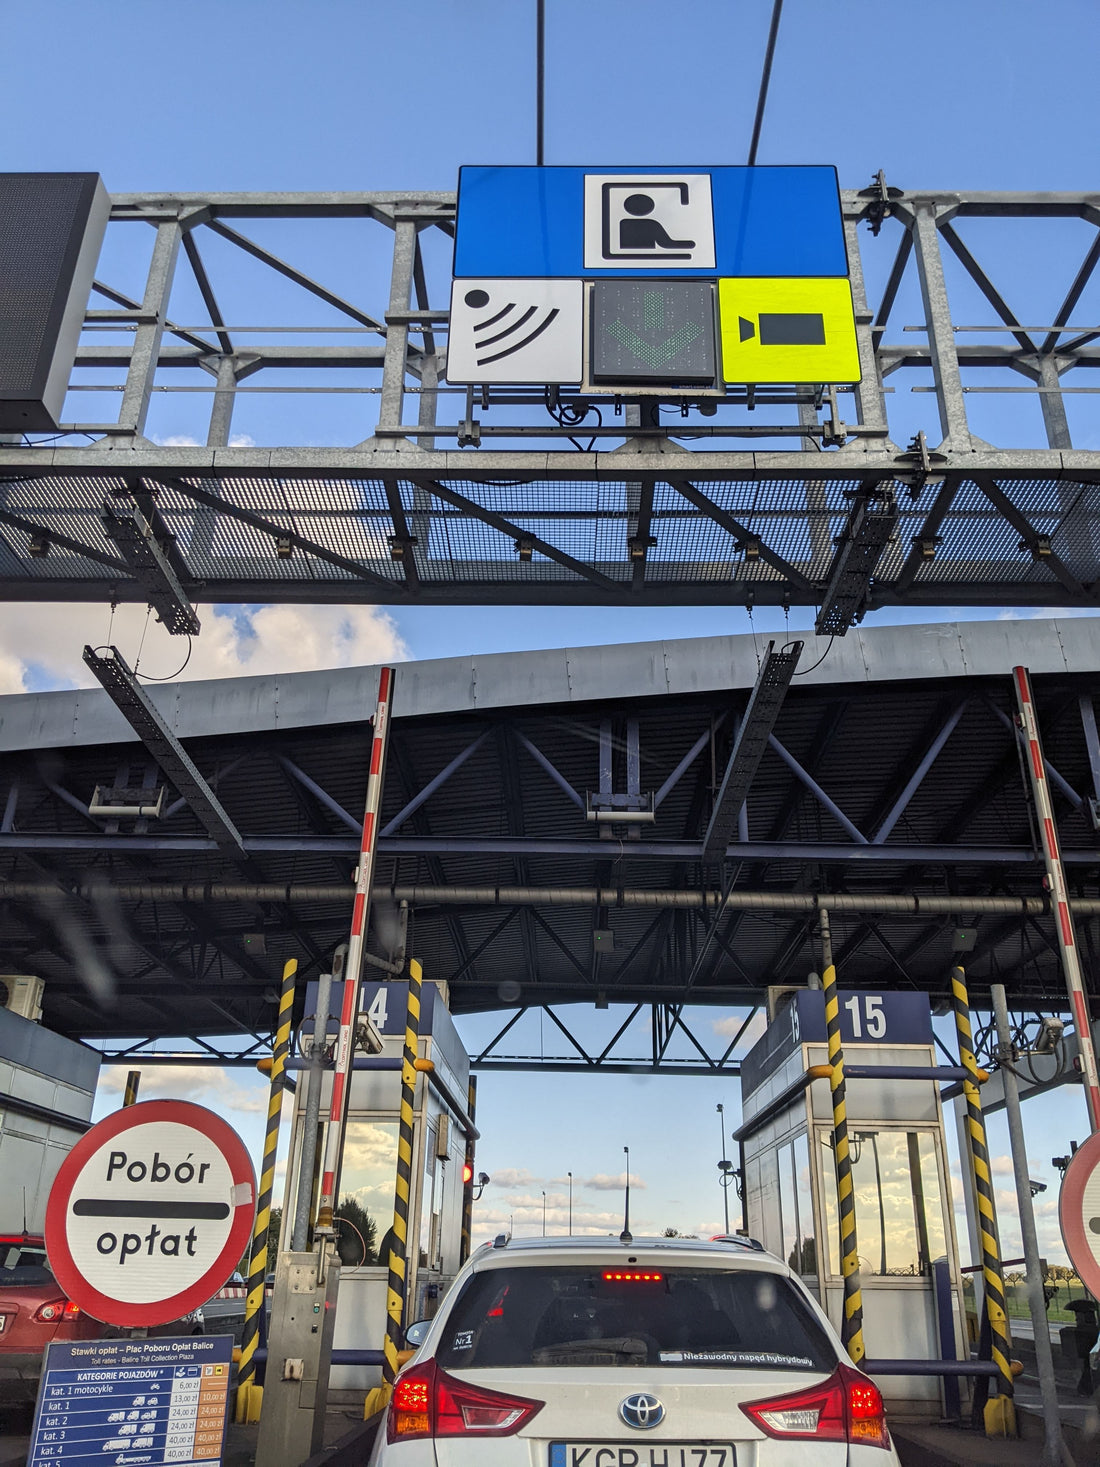 Toll booth in Europe